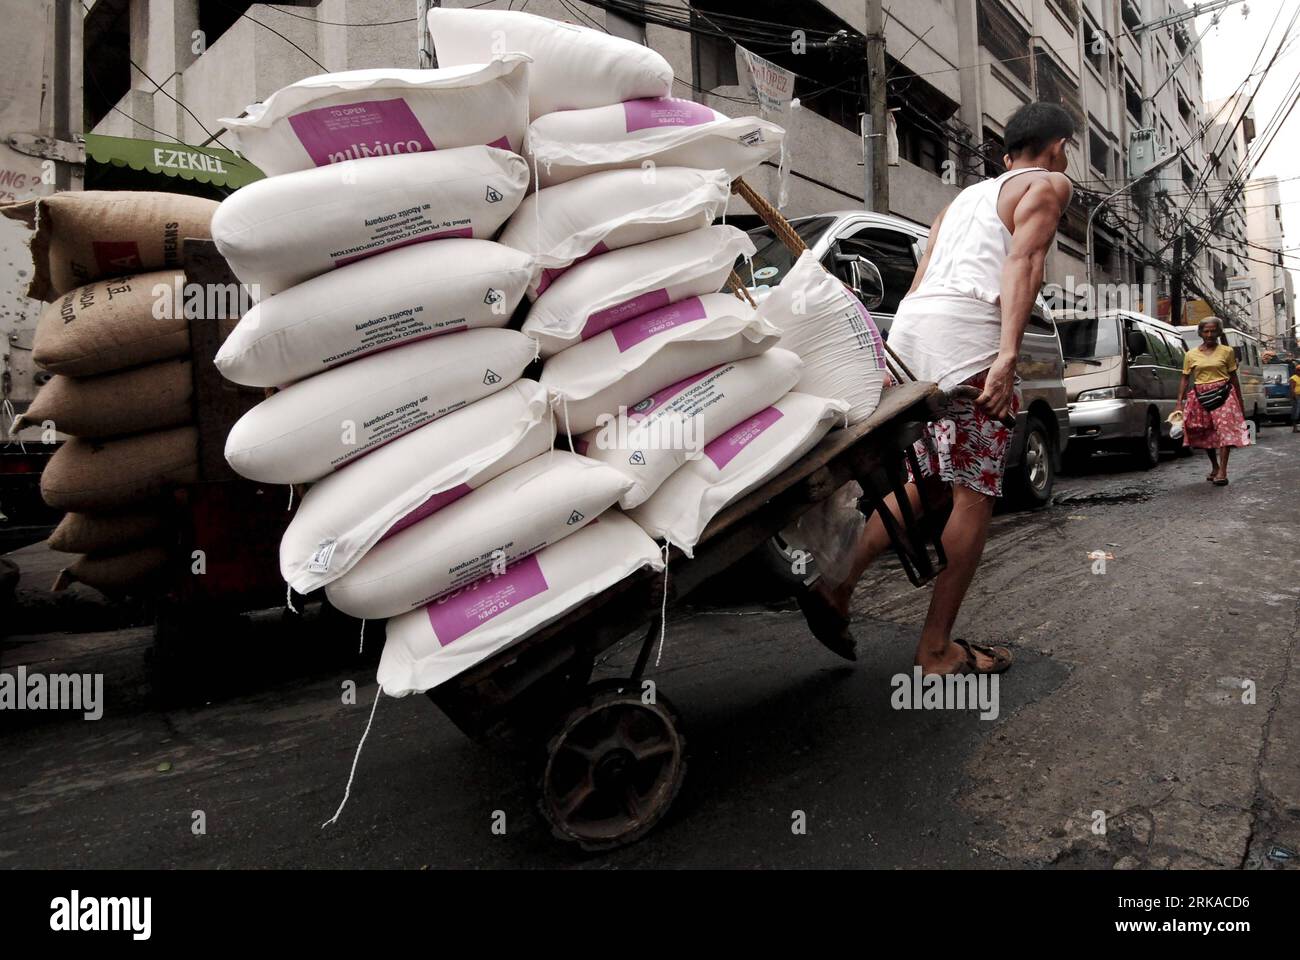 Bildnummer: 54311545  Datum: 18.08.2010  Copyright: imago/Xinhua (100818) -- MANILA, Aug. 18, 2010 (Xinhua) -- A local delivery man transports sacks of flour for distribution to retail outlets in Divisoria, Manila, the Philippines, Aug. 18, 2010. Members of the Philippine Association of Flour Millers (Pafmil) announced an increase in price of hard and soft flour to reflect the surge in wheat prices brought about by Russia s ban on grain import to protect its domestic supply. Russia recently suffered its worst-ever heat wave which could reduce the grain harvest by up to 40 percent.(Xinhua/Jon F Stock Photo